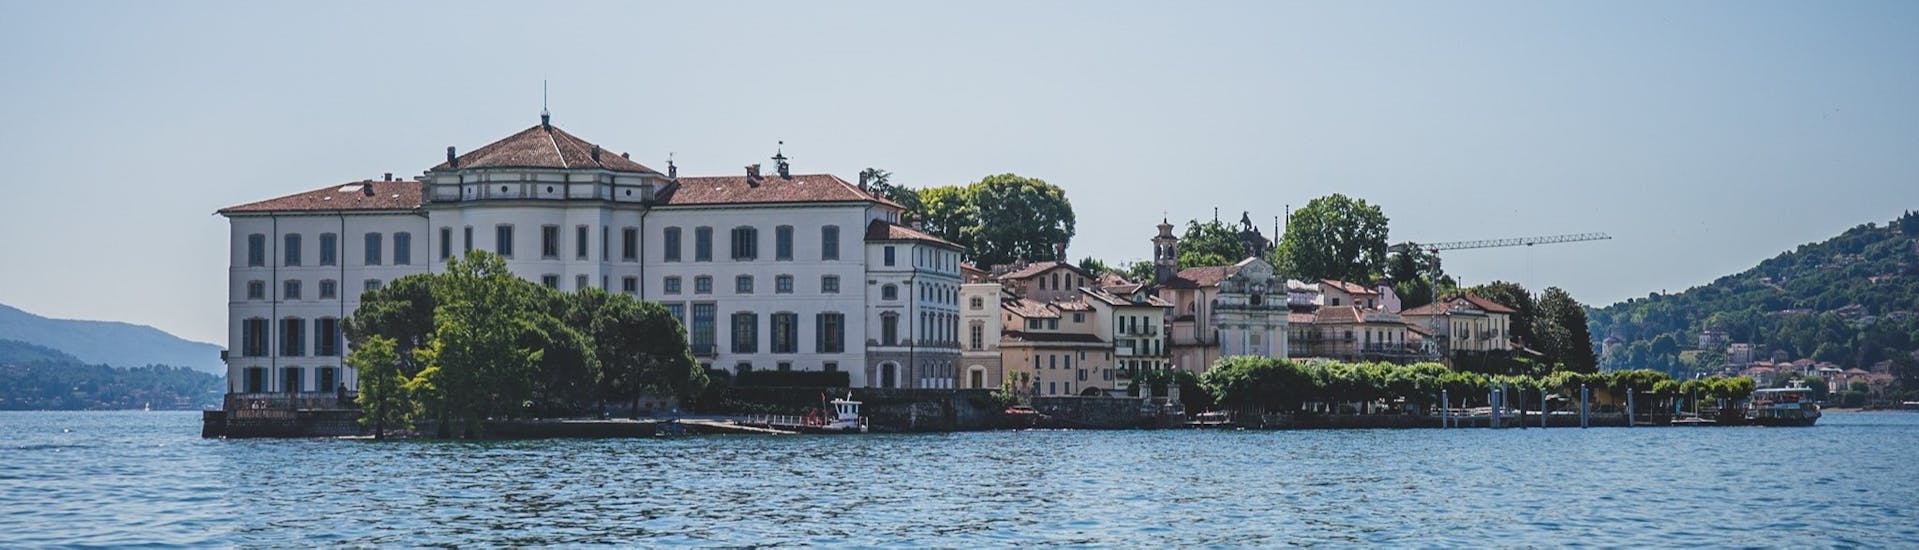 View of the Borromeo Palace reachablewith the Boat Transfer from Baveno to Isola Bella and Isola dei Pescatori with Summer Boats Baveno.